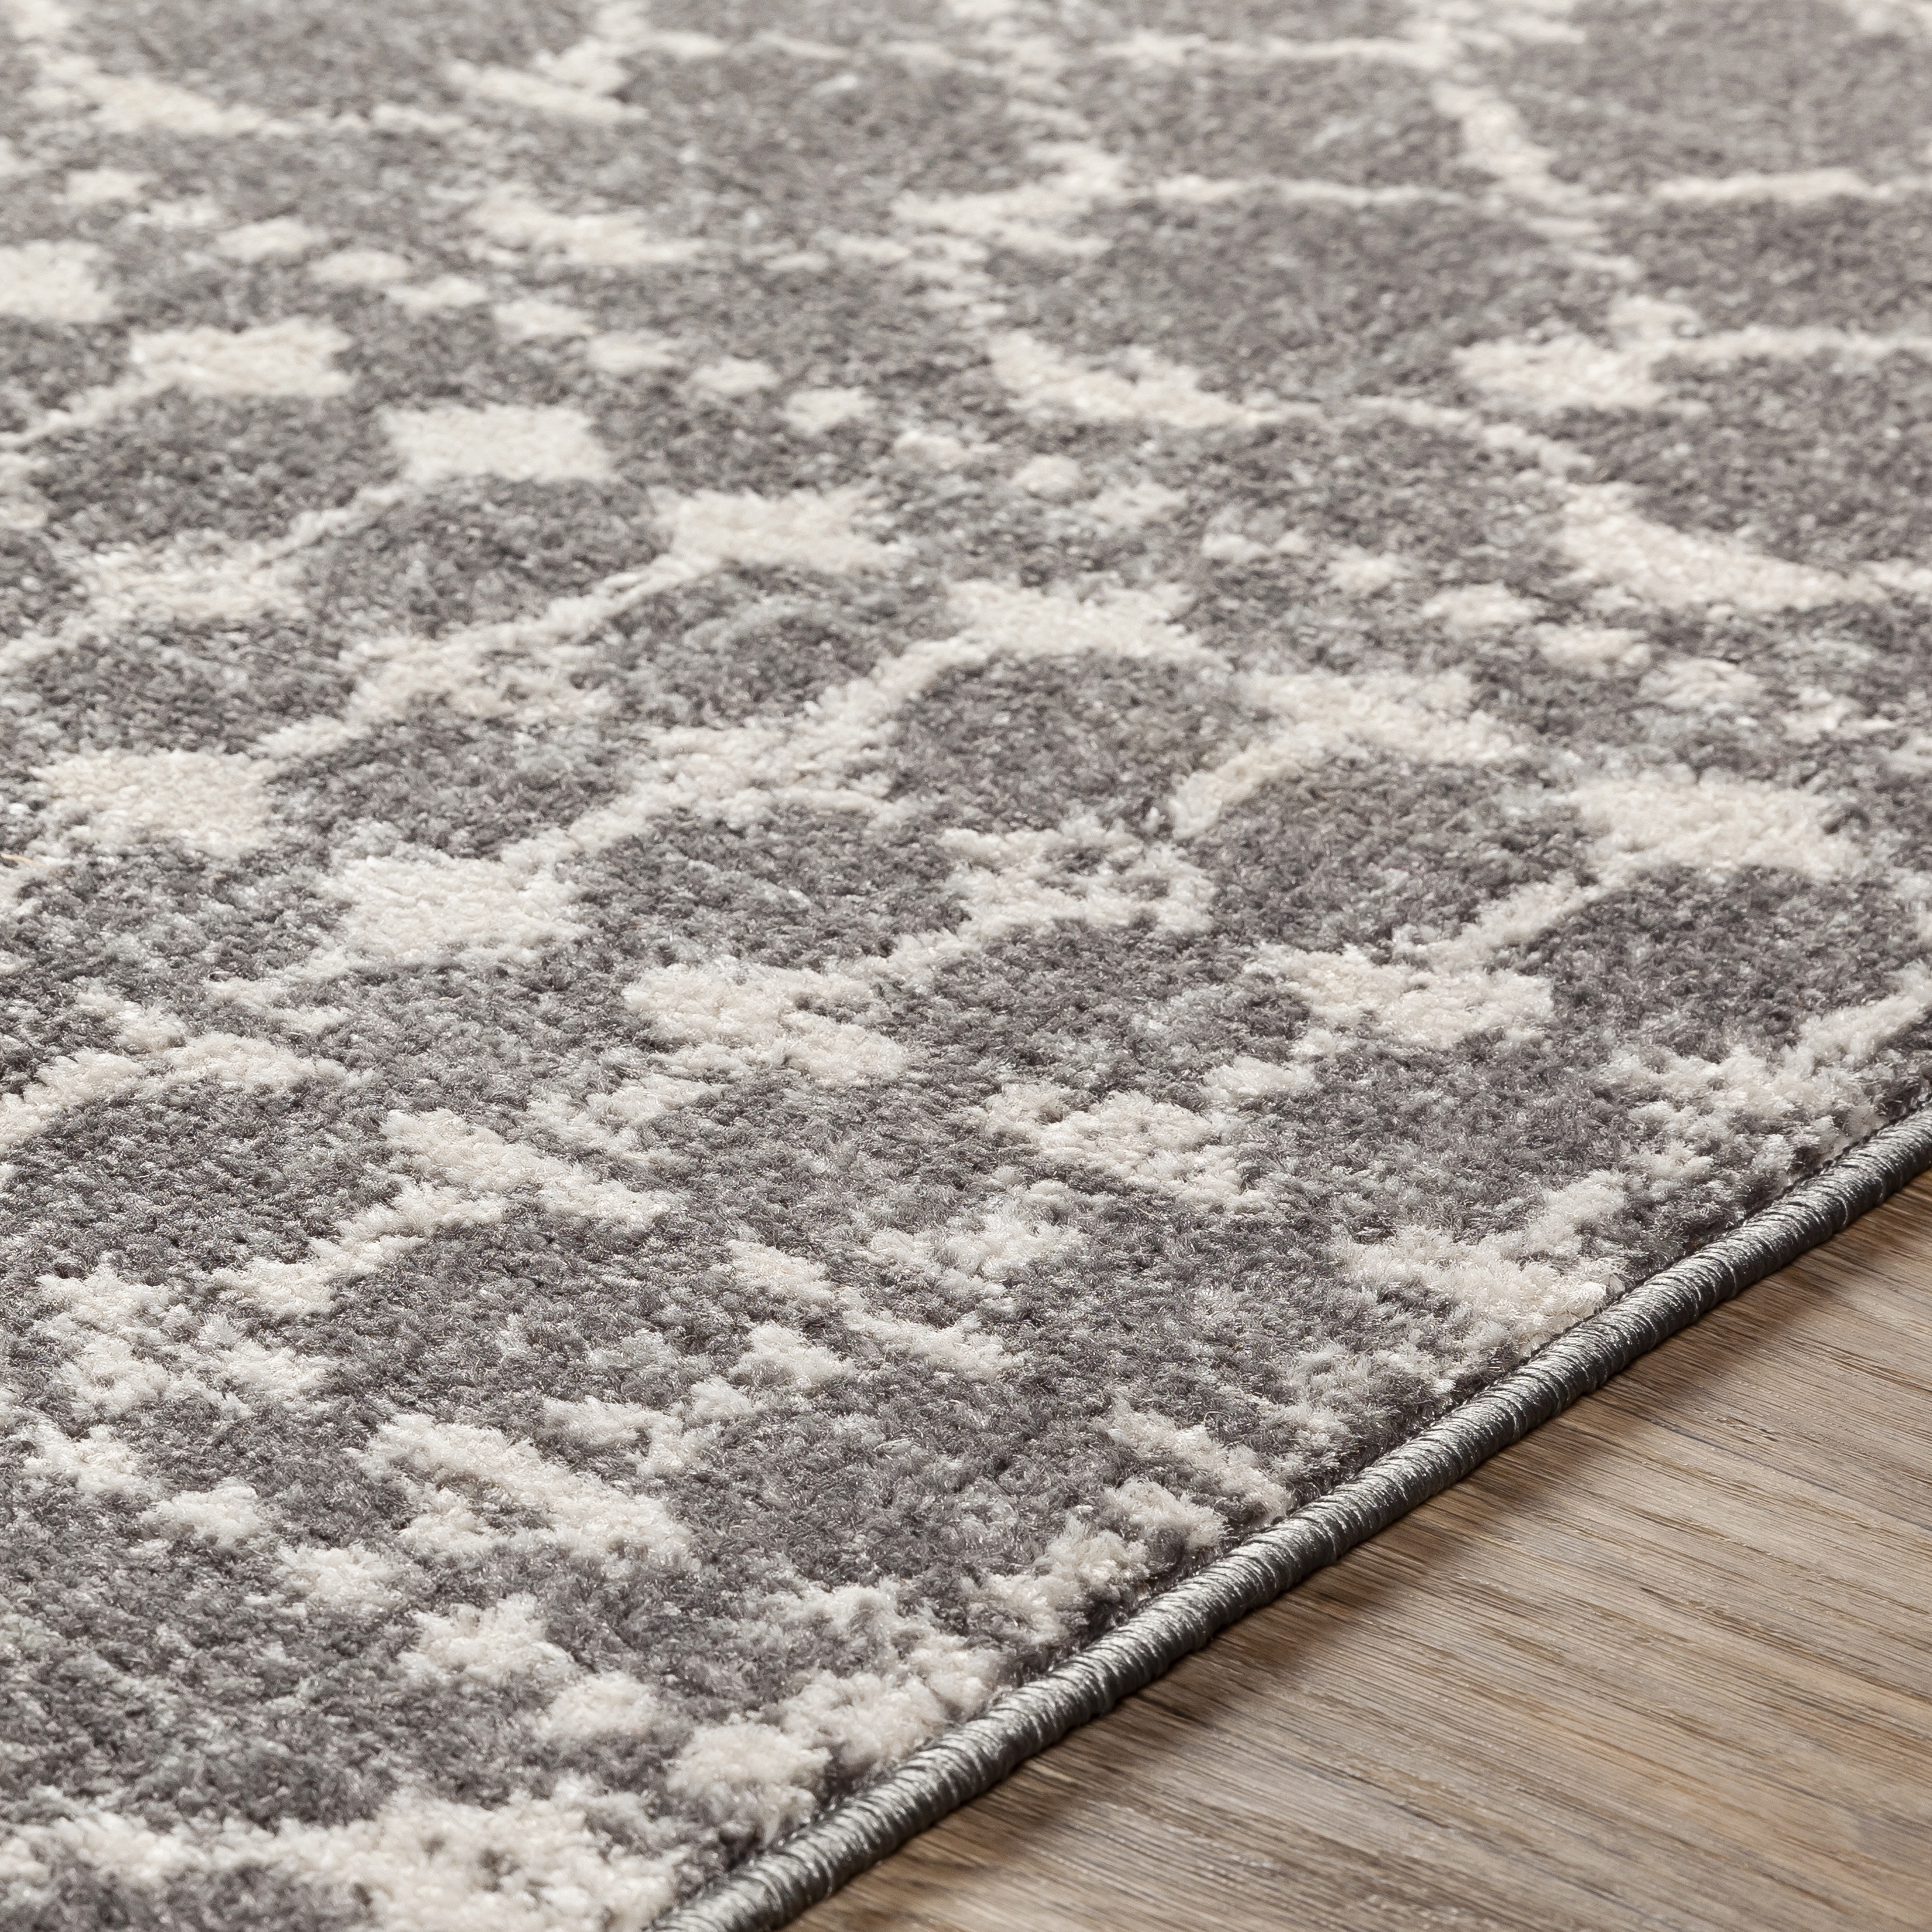 Chester Rug, 6'7" x 9' - Image 3